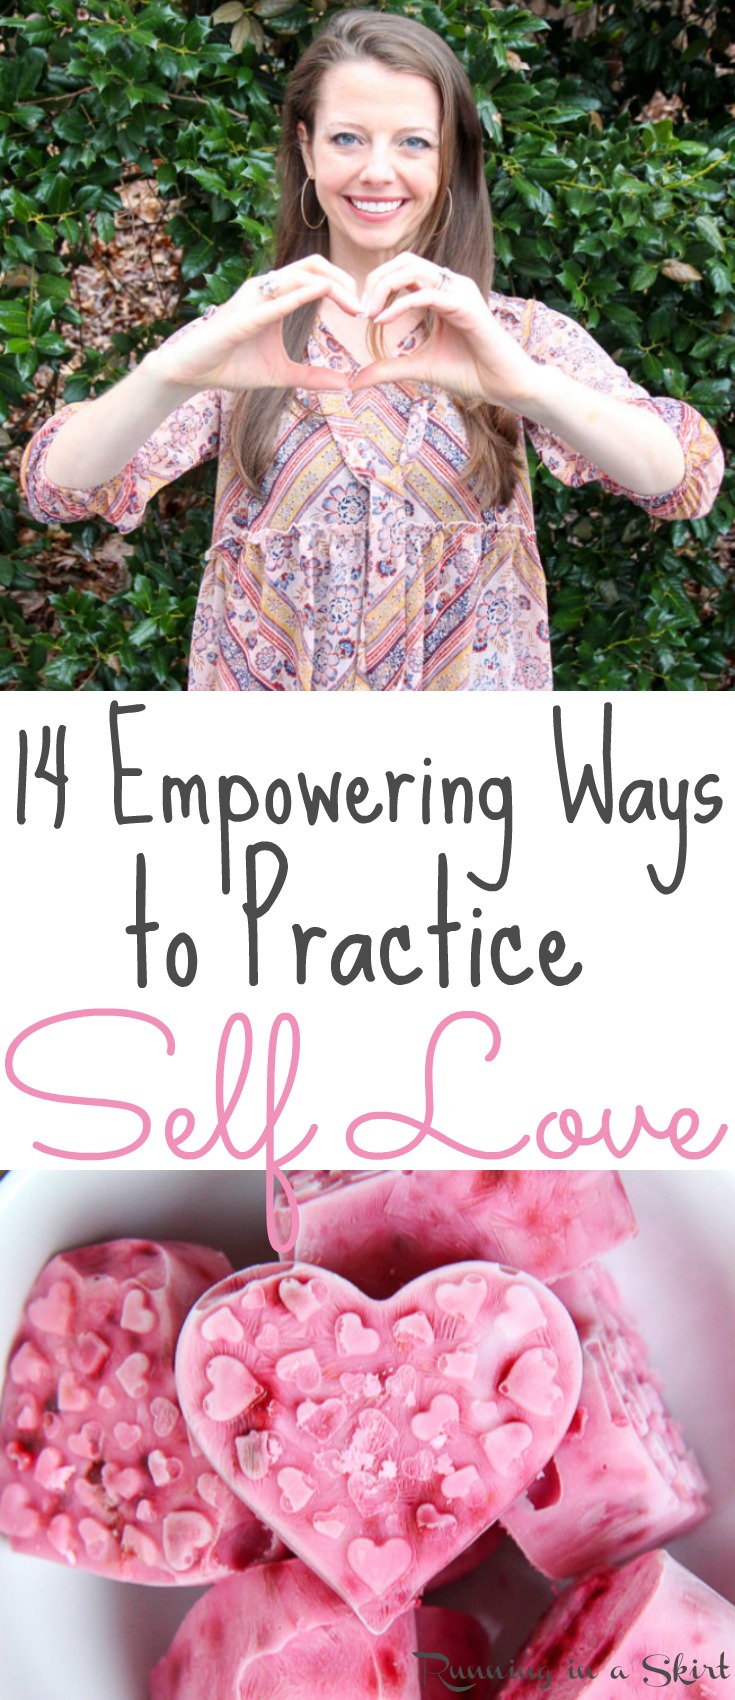 14 Empowering Ways to Practice Self Love.  Tips, inspiration and activities to practice taking time for yourself. Includes a routine / list for self care that can get you back on track to recovery, positivity and happiness./ Running in a Skirt via @juliewunder